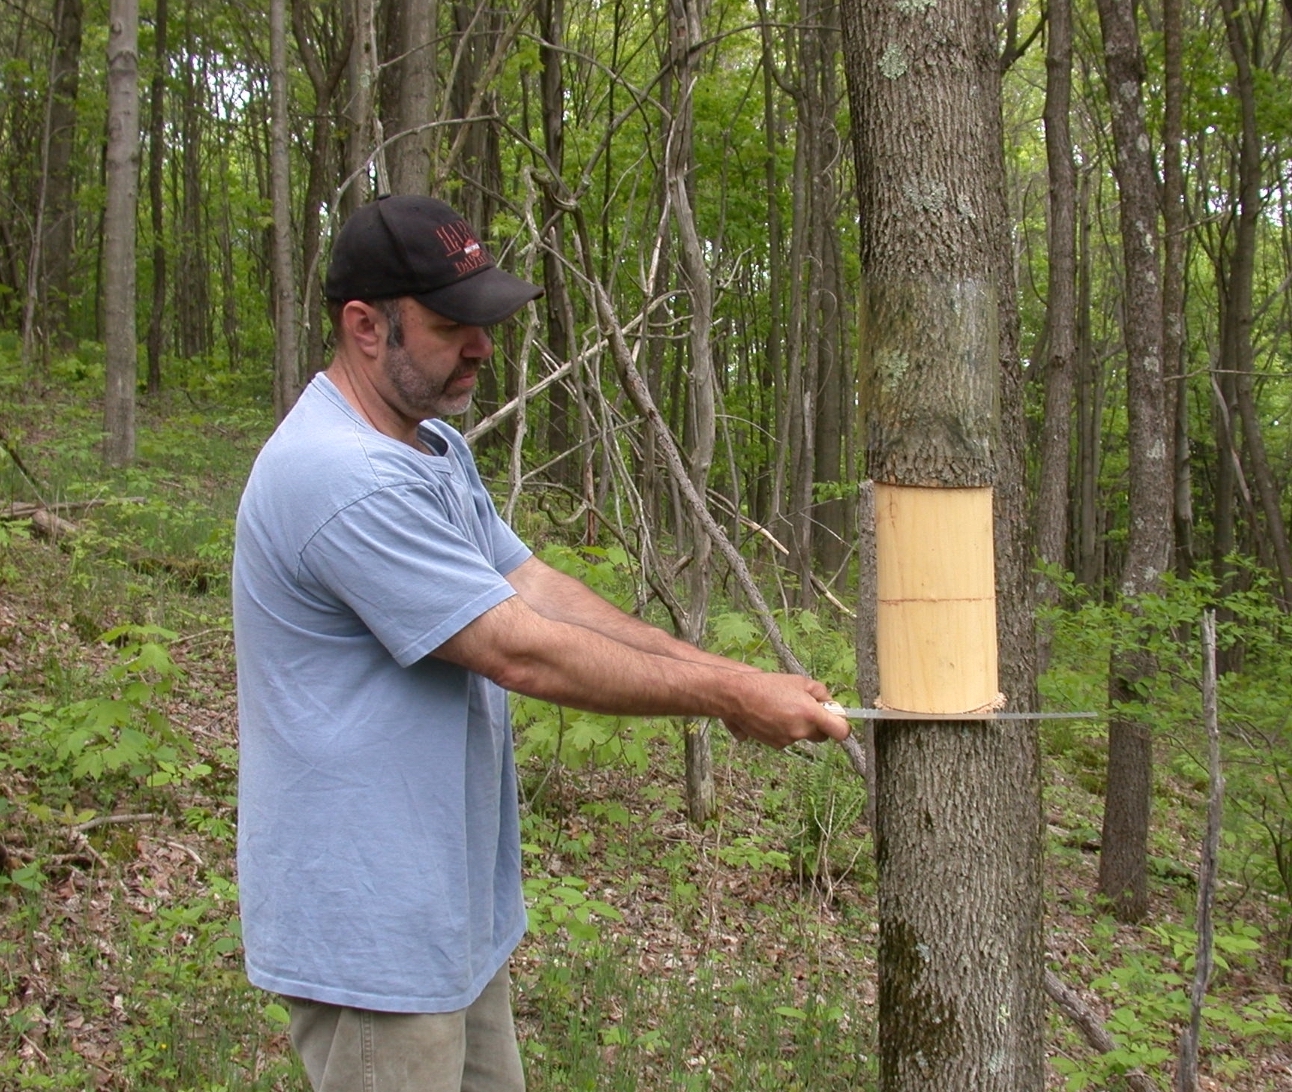 Girdling is a tool for detection and managing EAB